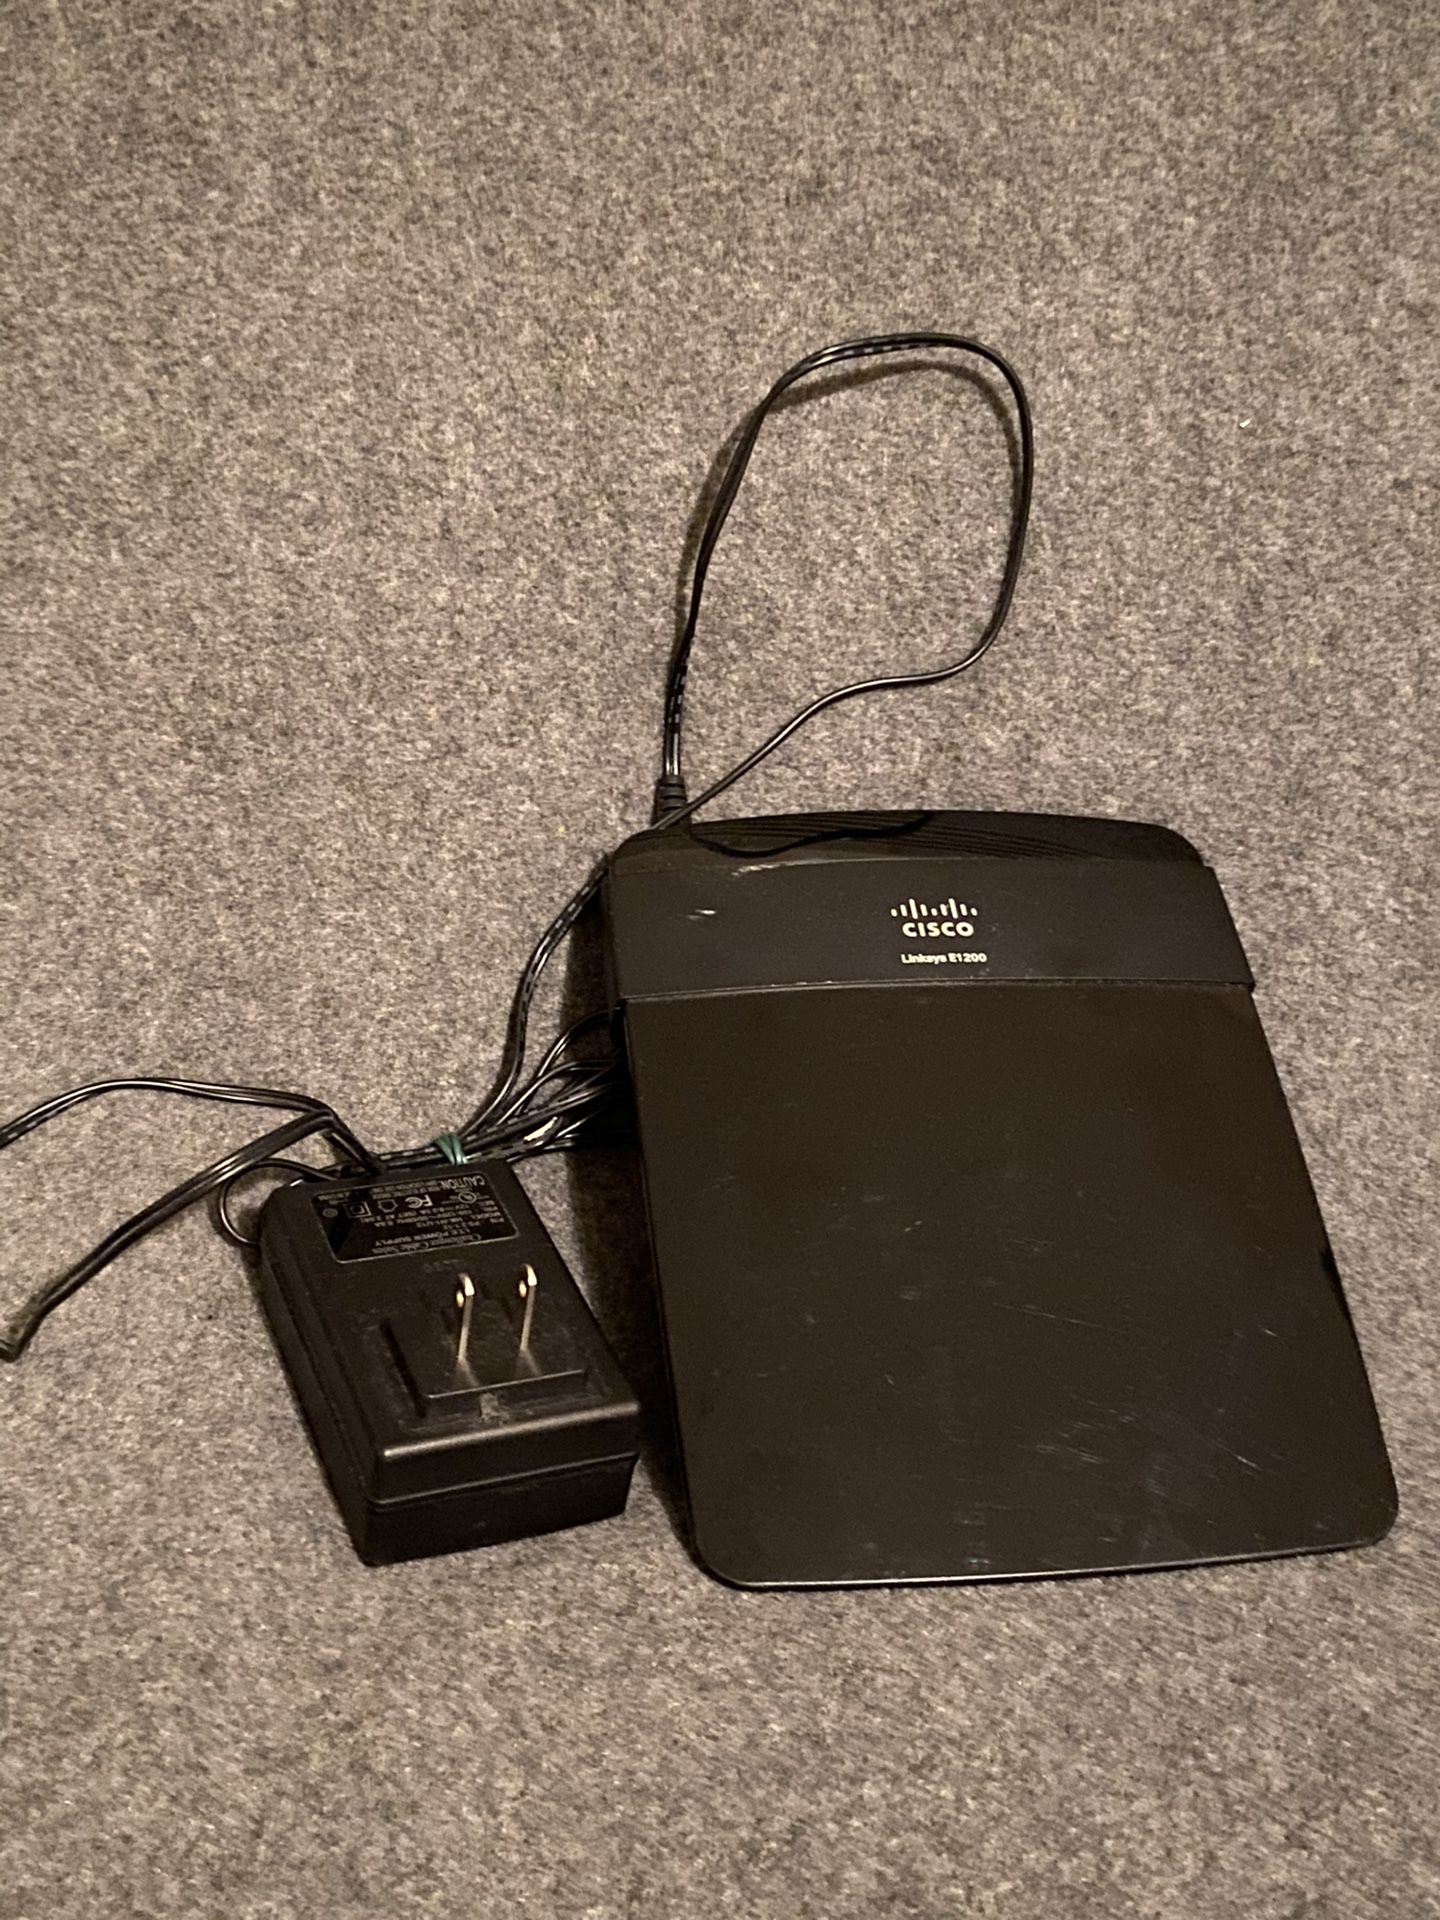 Cisco Linksys E1200 Wireless Network N Router